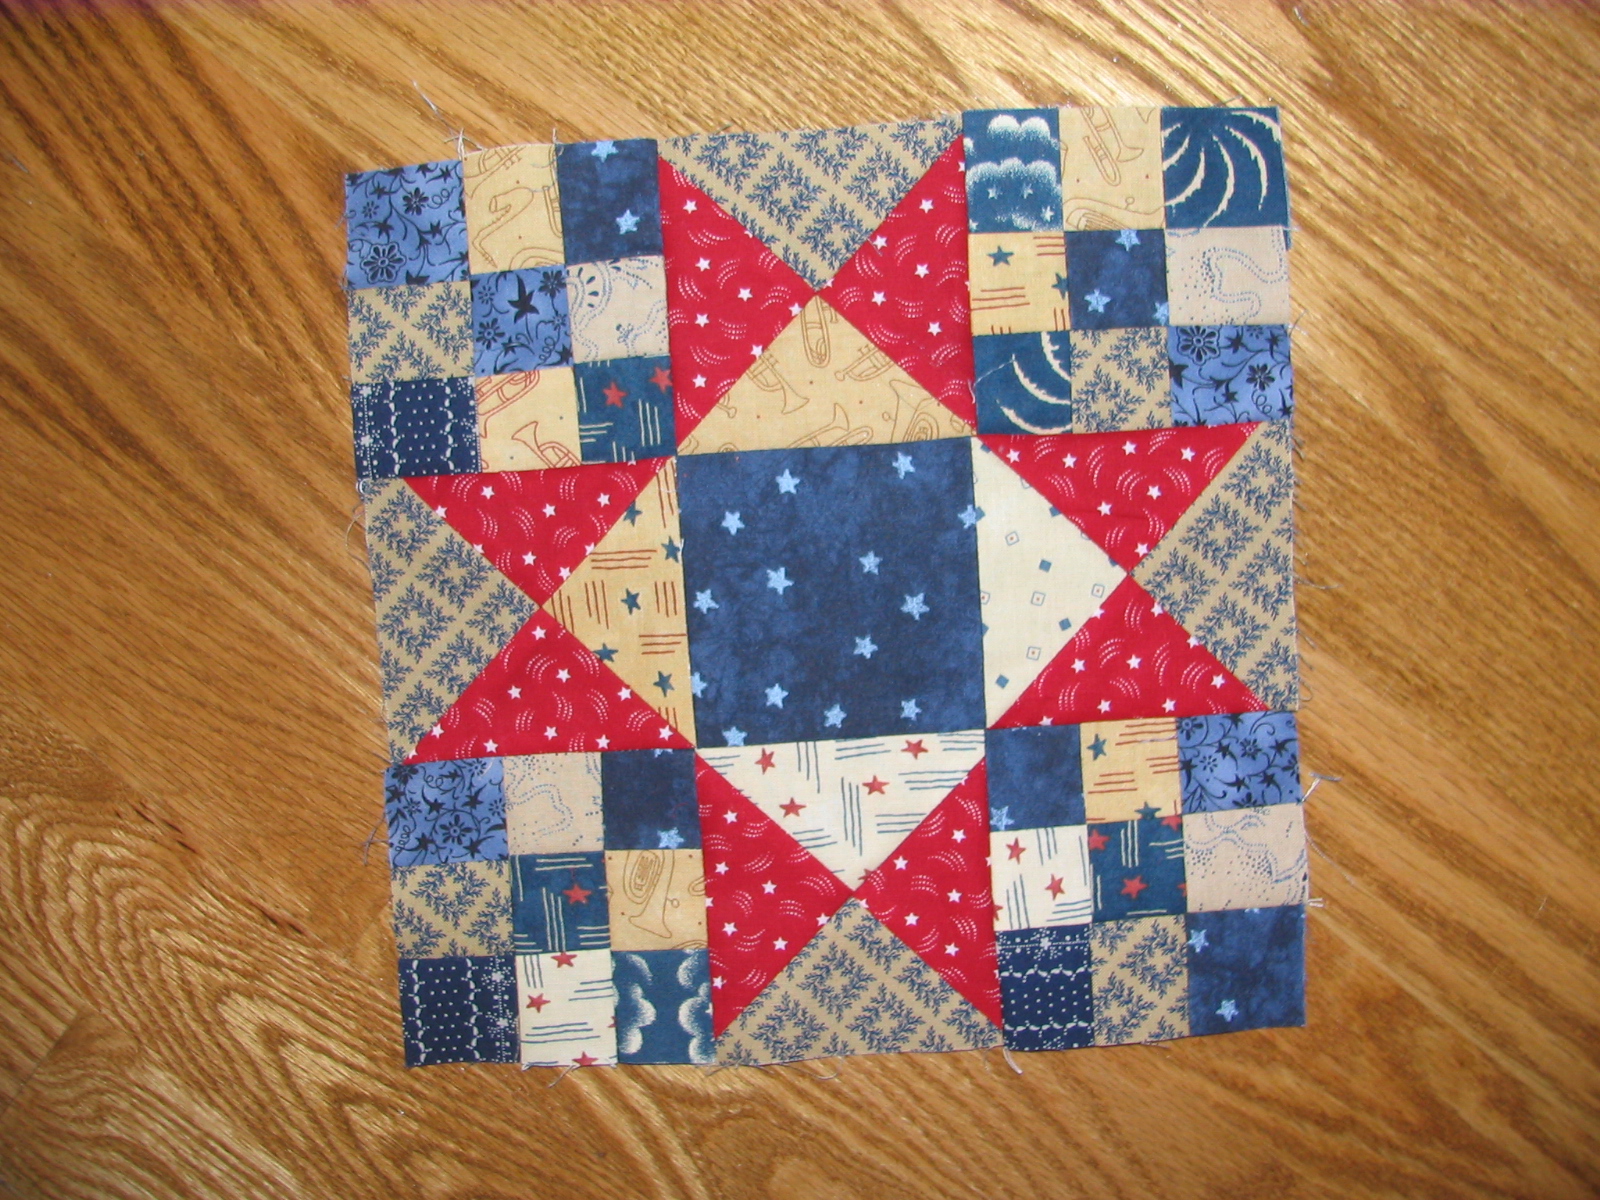 Shirley Anne’s Heart » What is on my DESIGN FLOOR, Monday, April 2, 2012